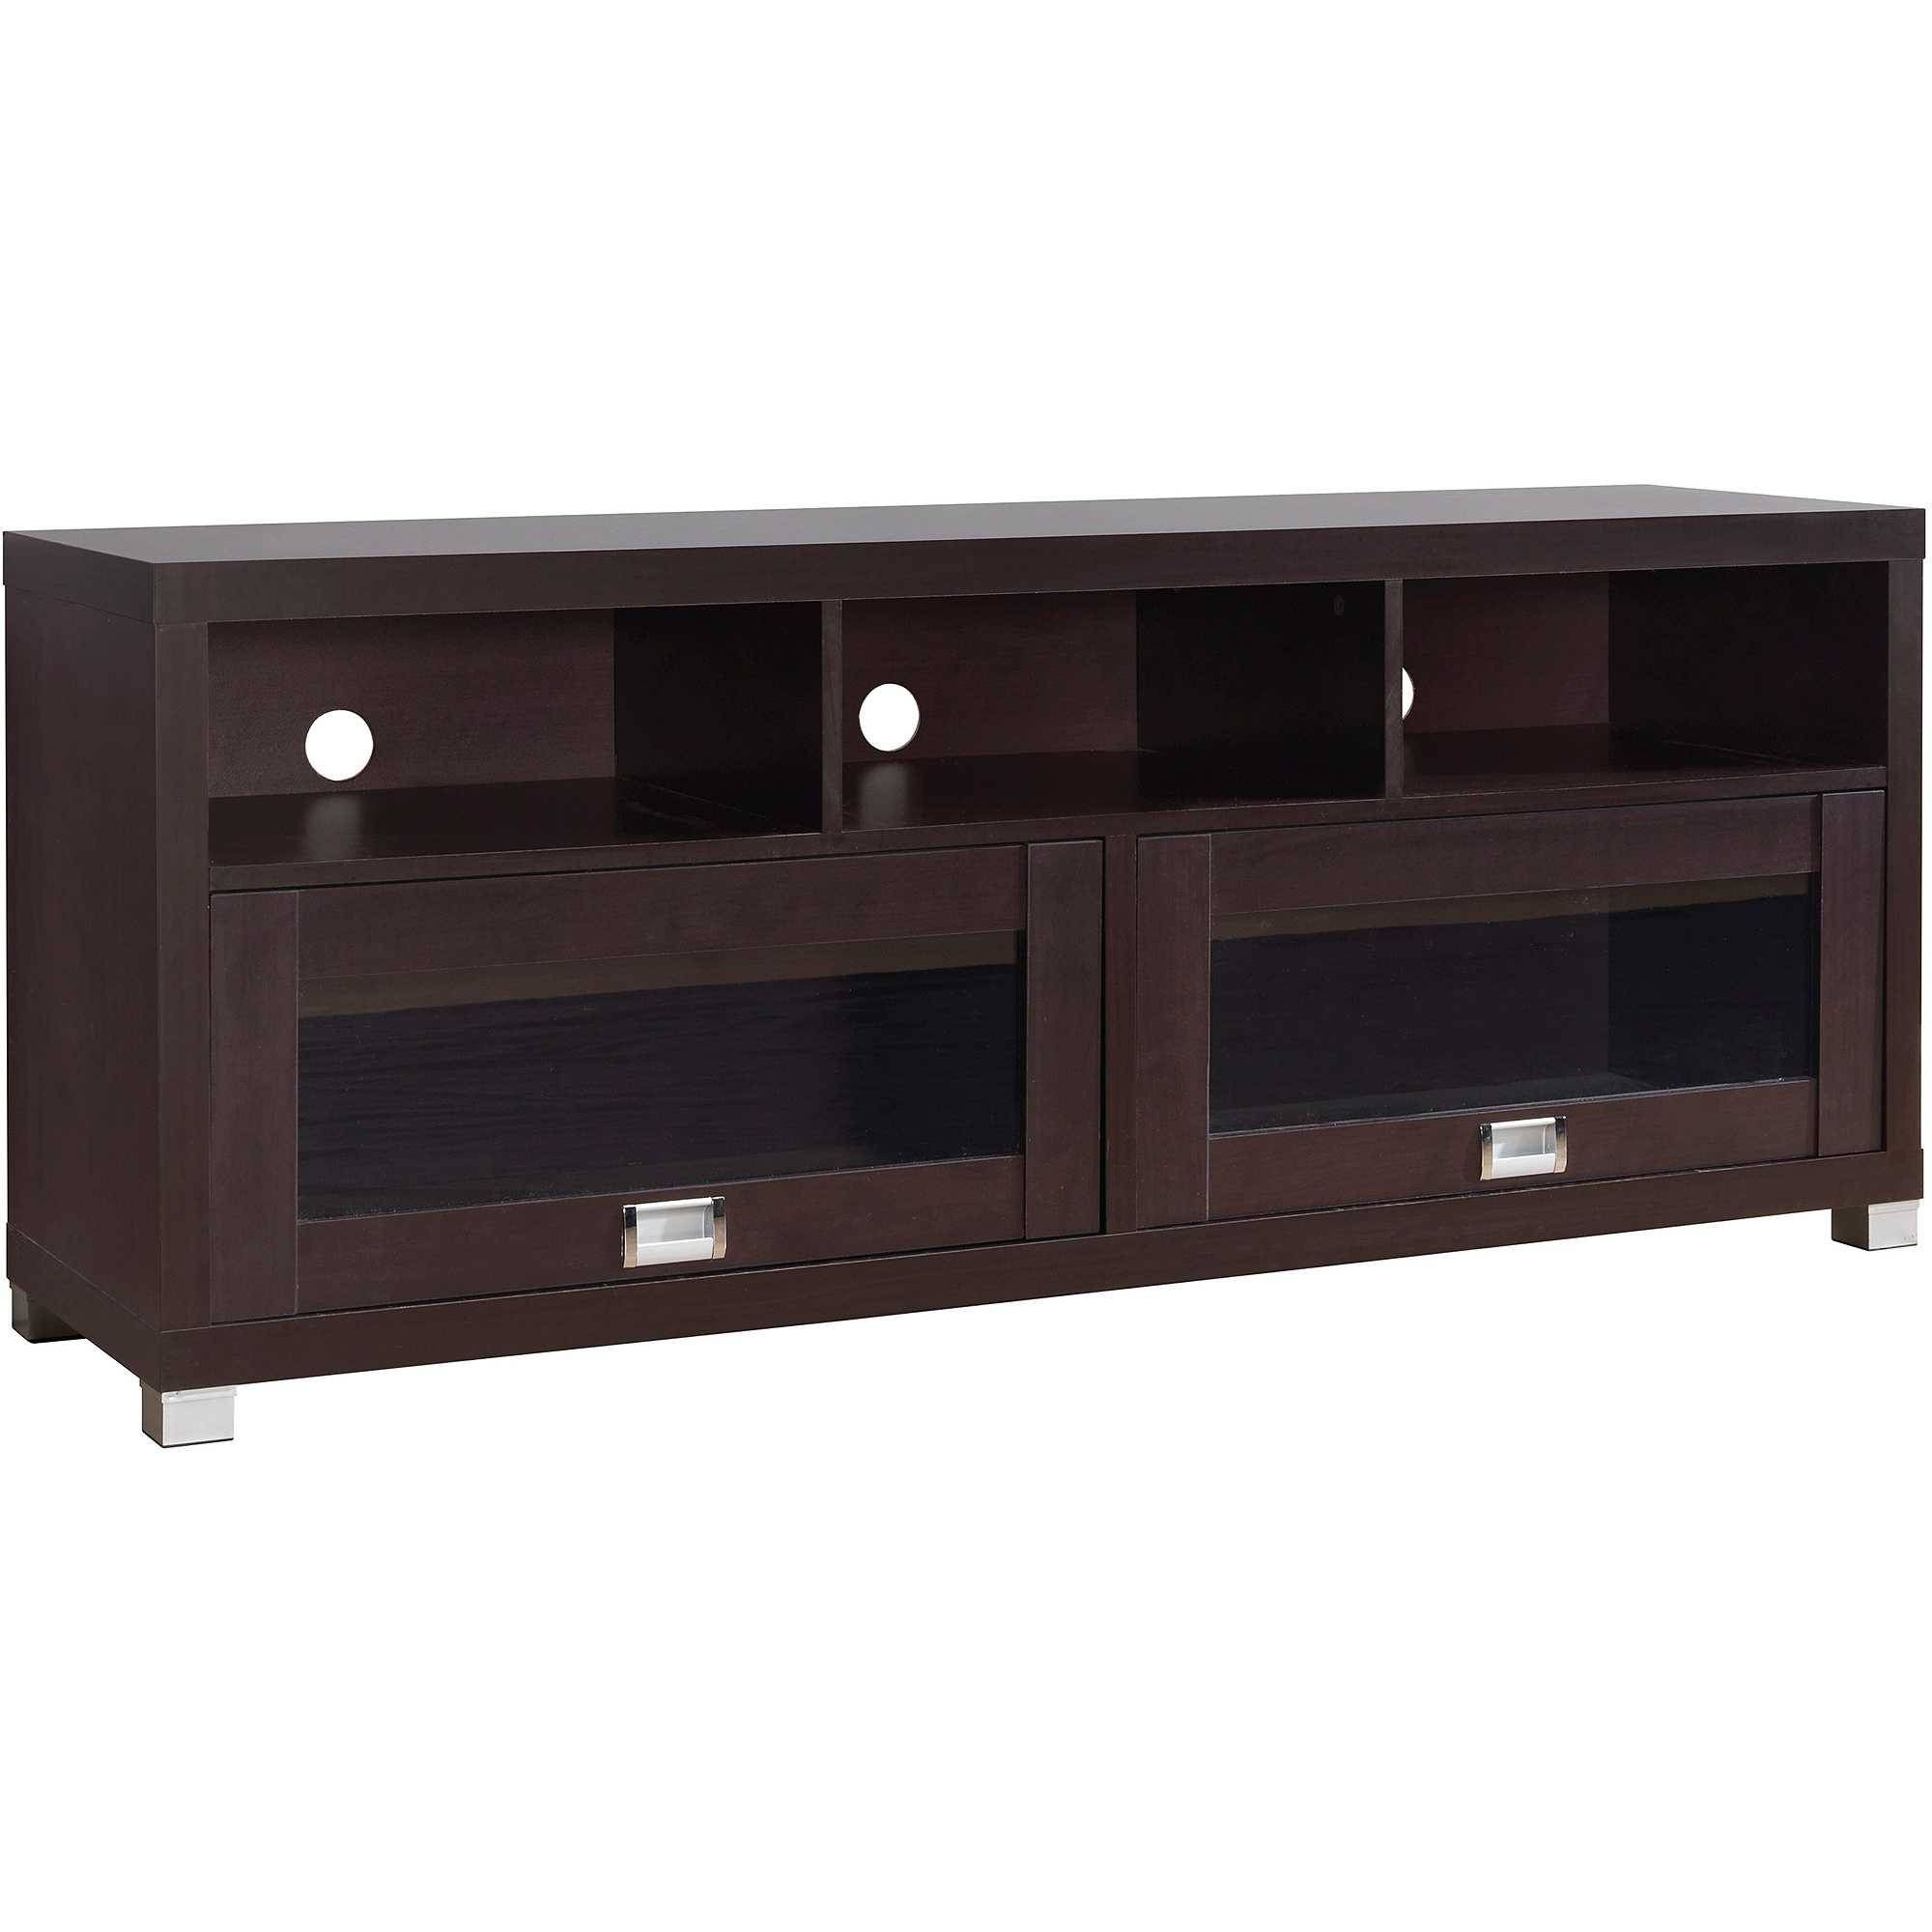 Espresso Tv Stand, Techni Mobili Durbin Tv Cabinet For Tvs Up To With Expresso Tv Stands (View 1 of 15)